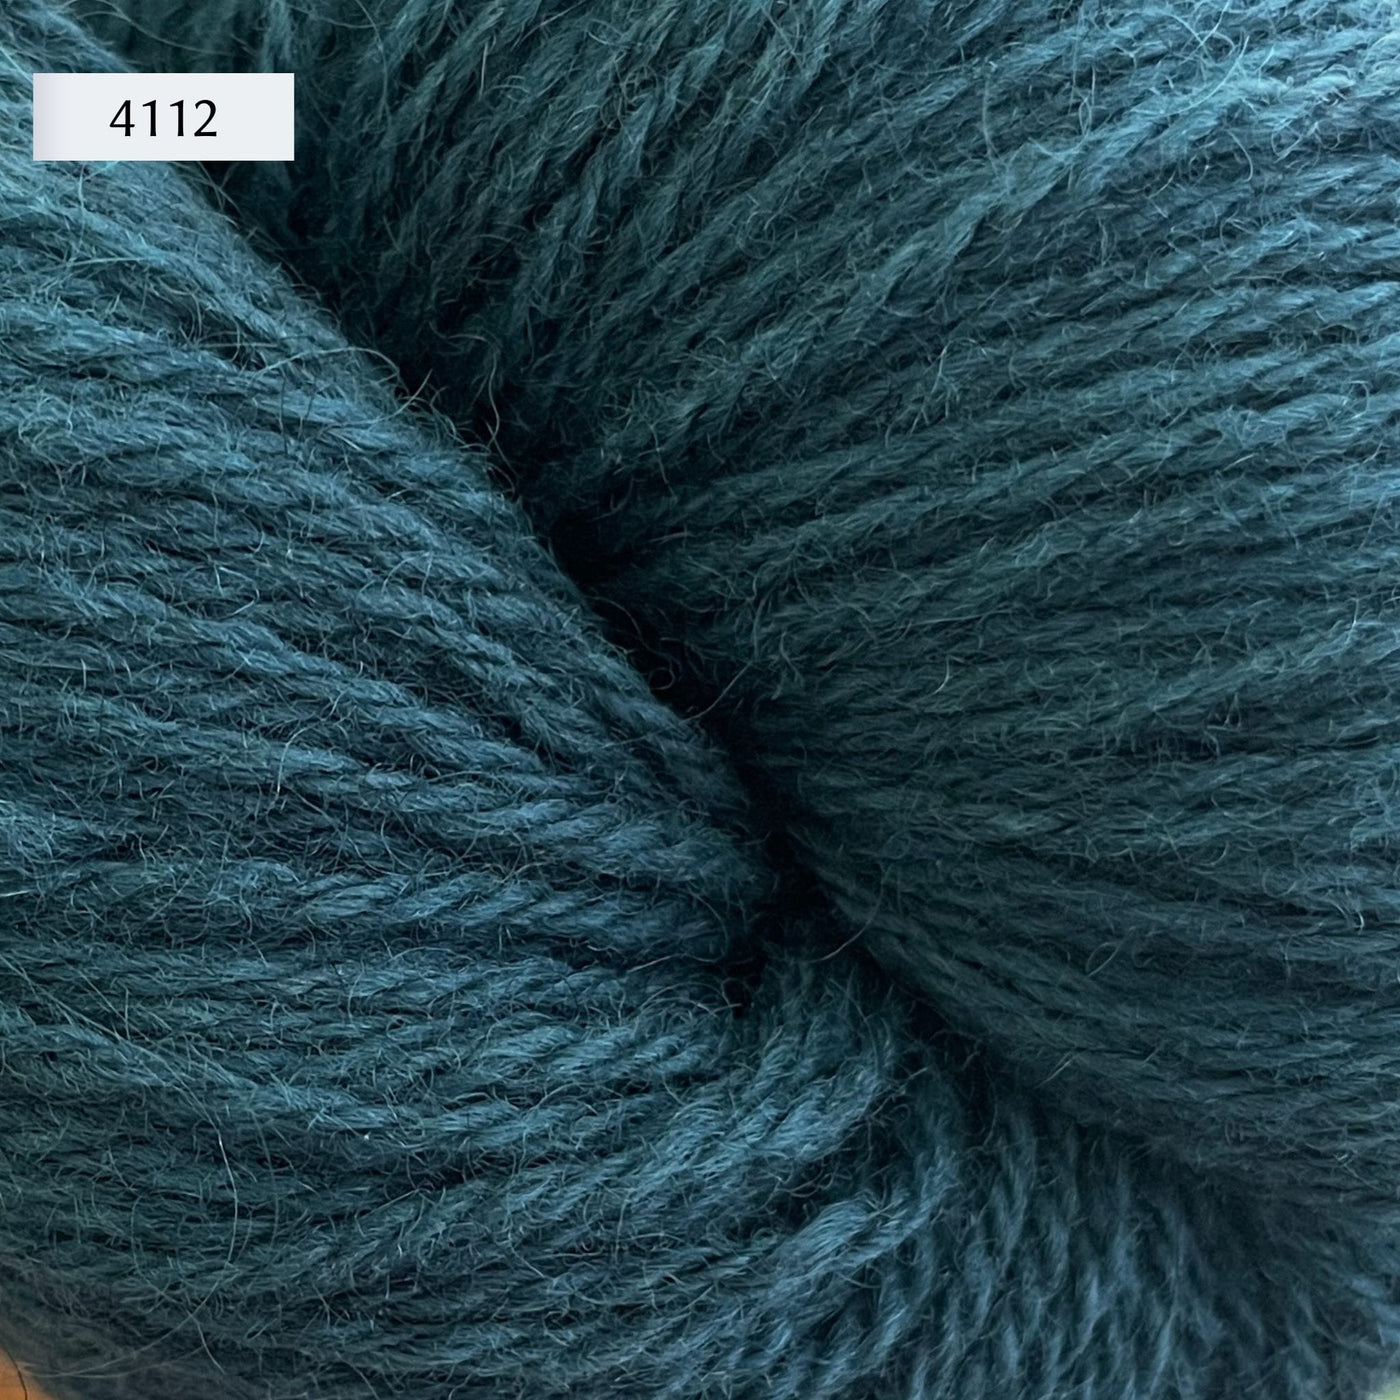 Ullcentrum 3ply, a worsted weight wool yarn, in color 4112, a petrol blue/teal